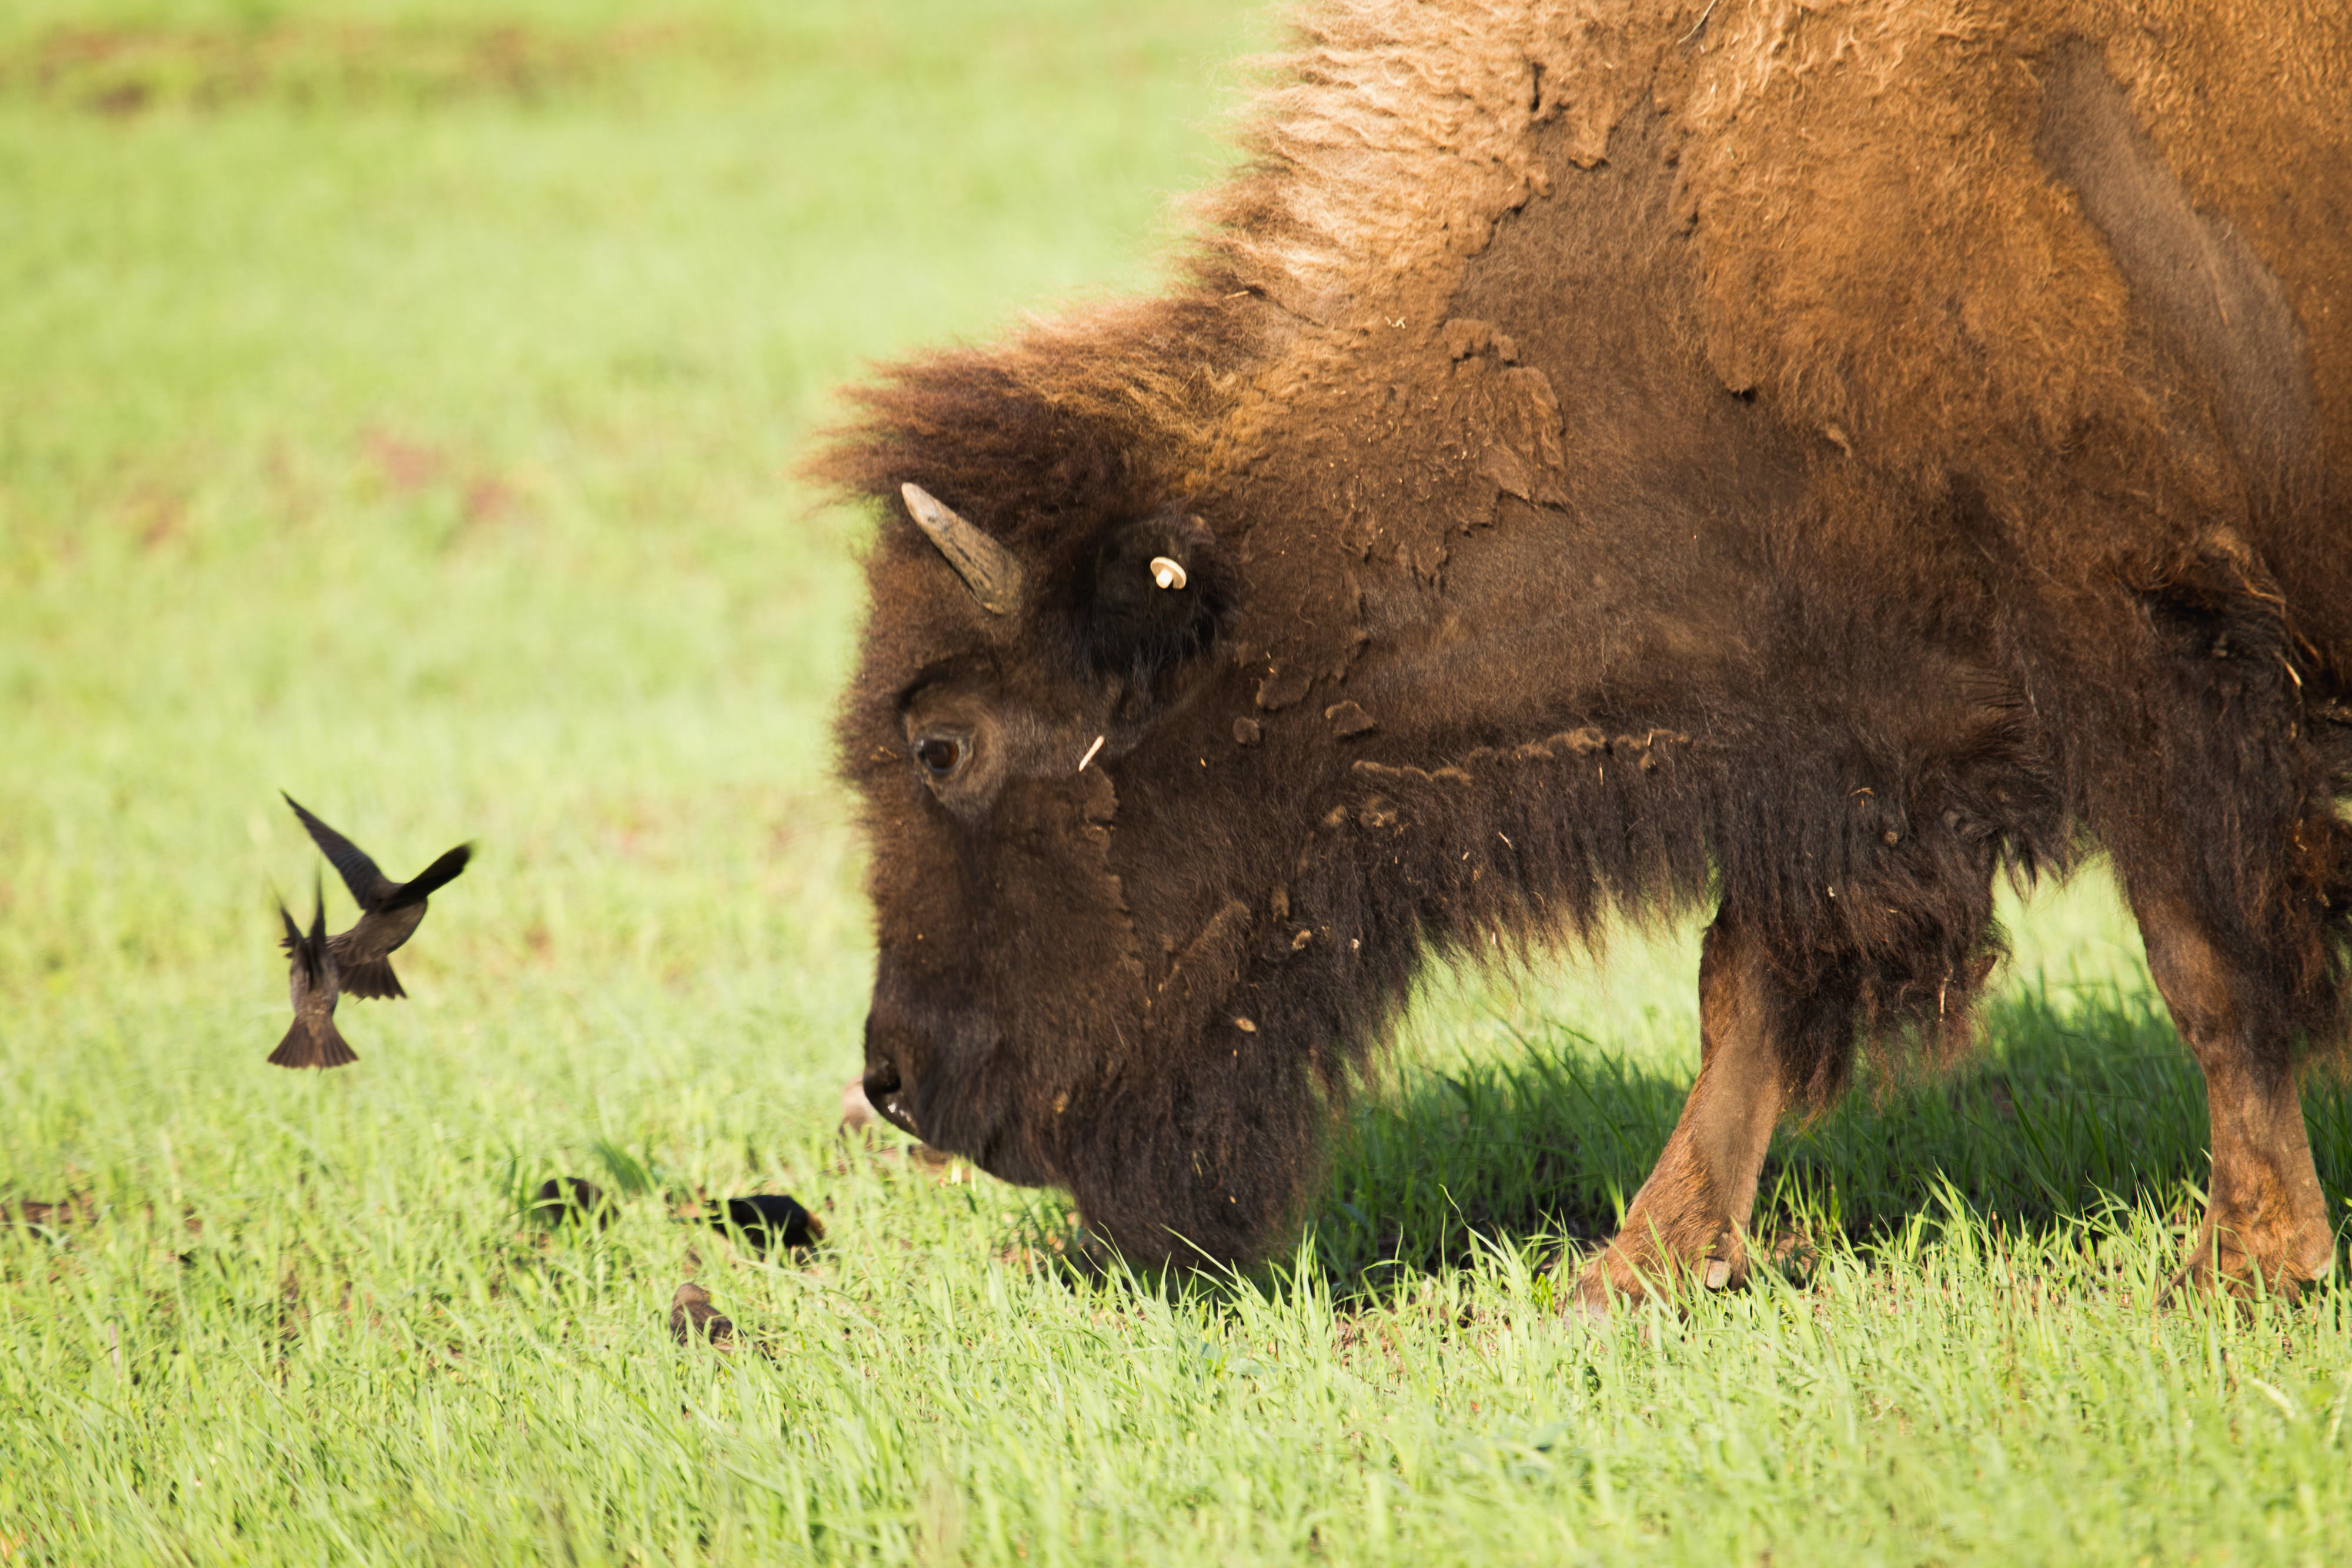 An adult bison watching a small group of birds.